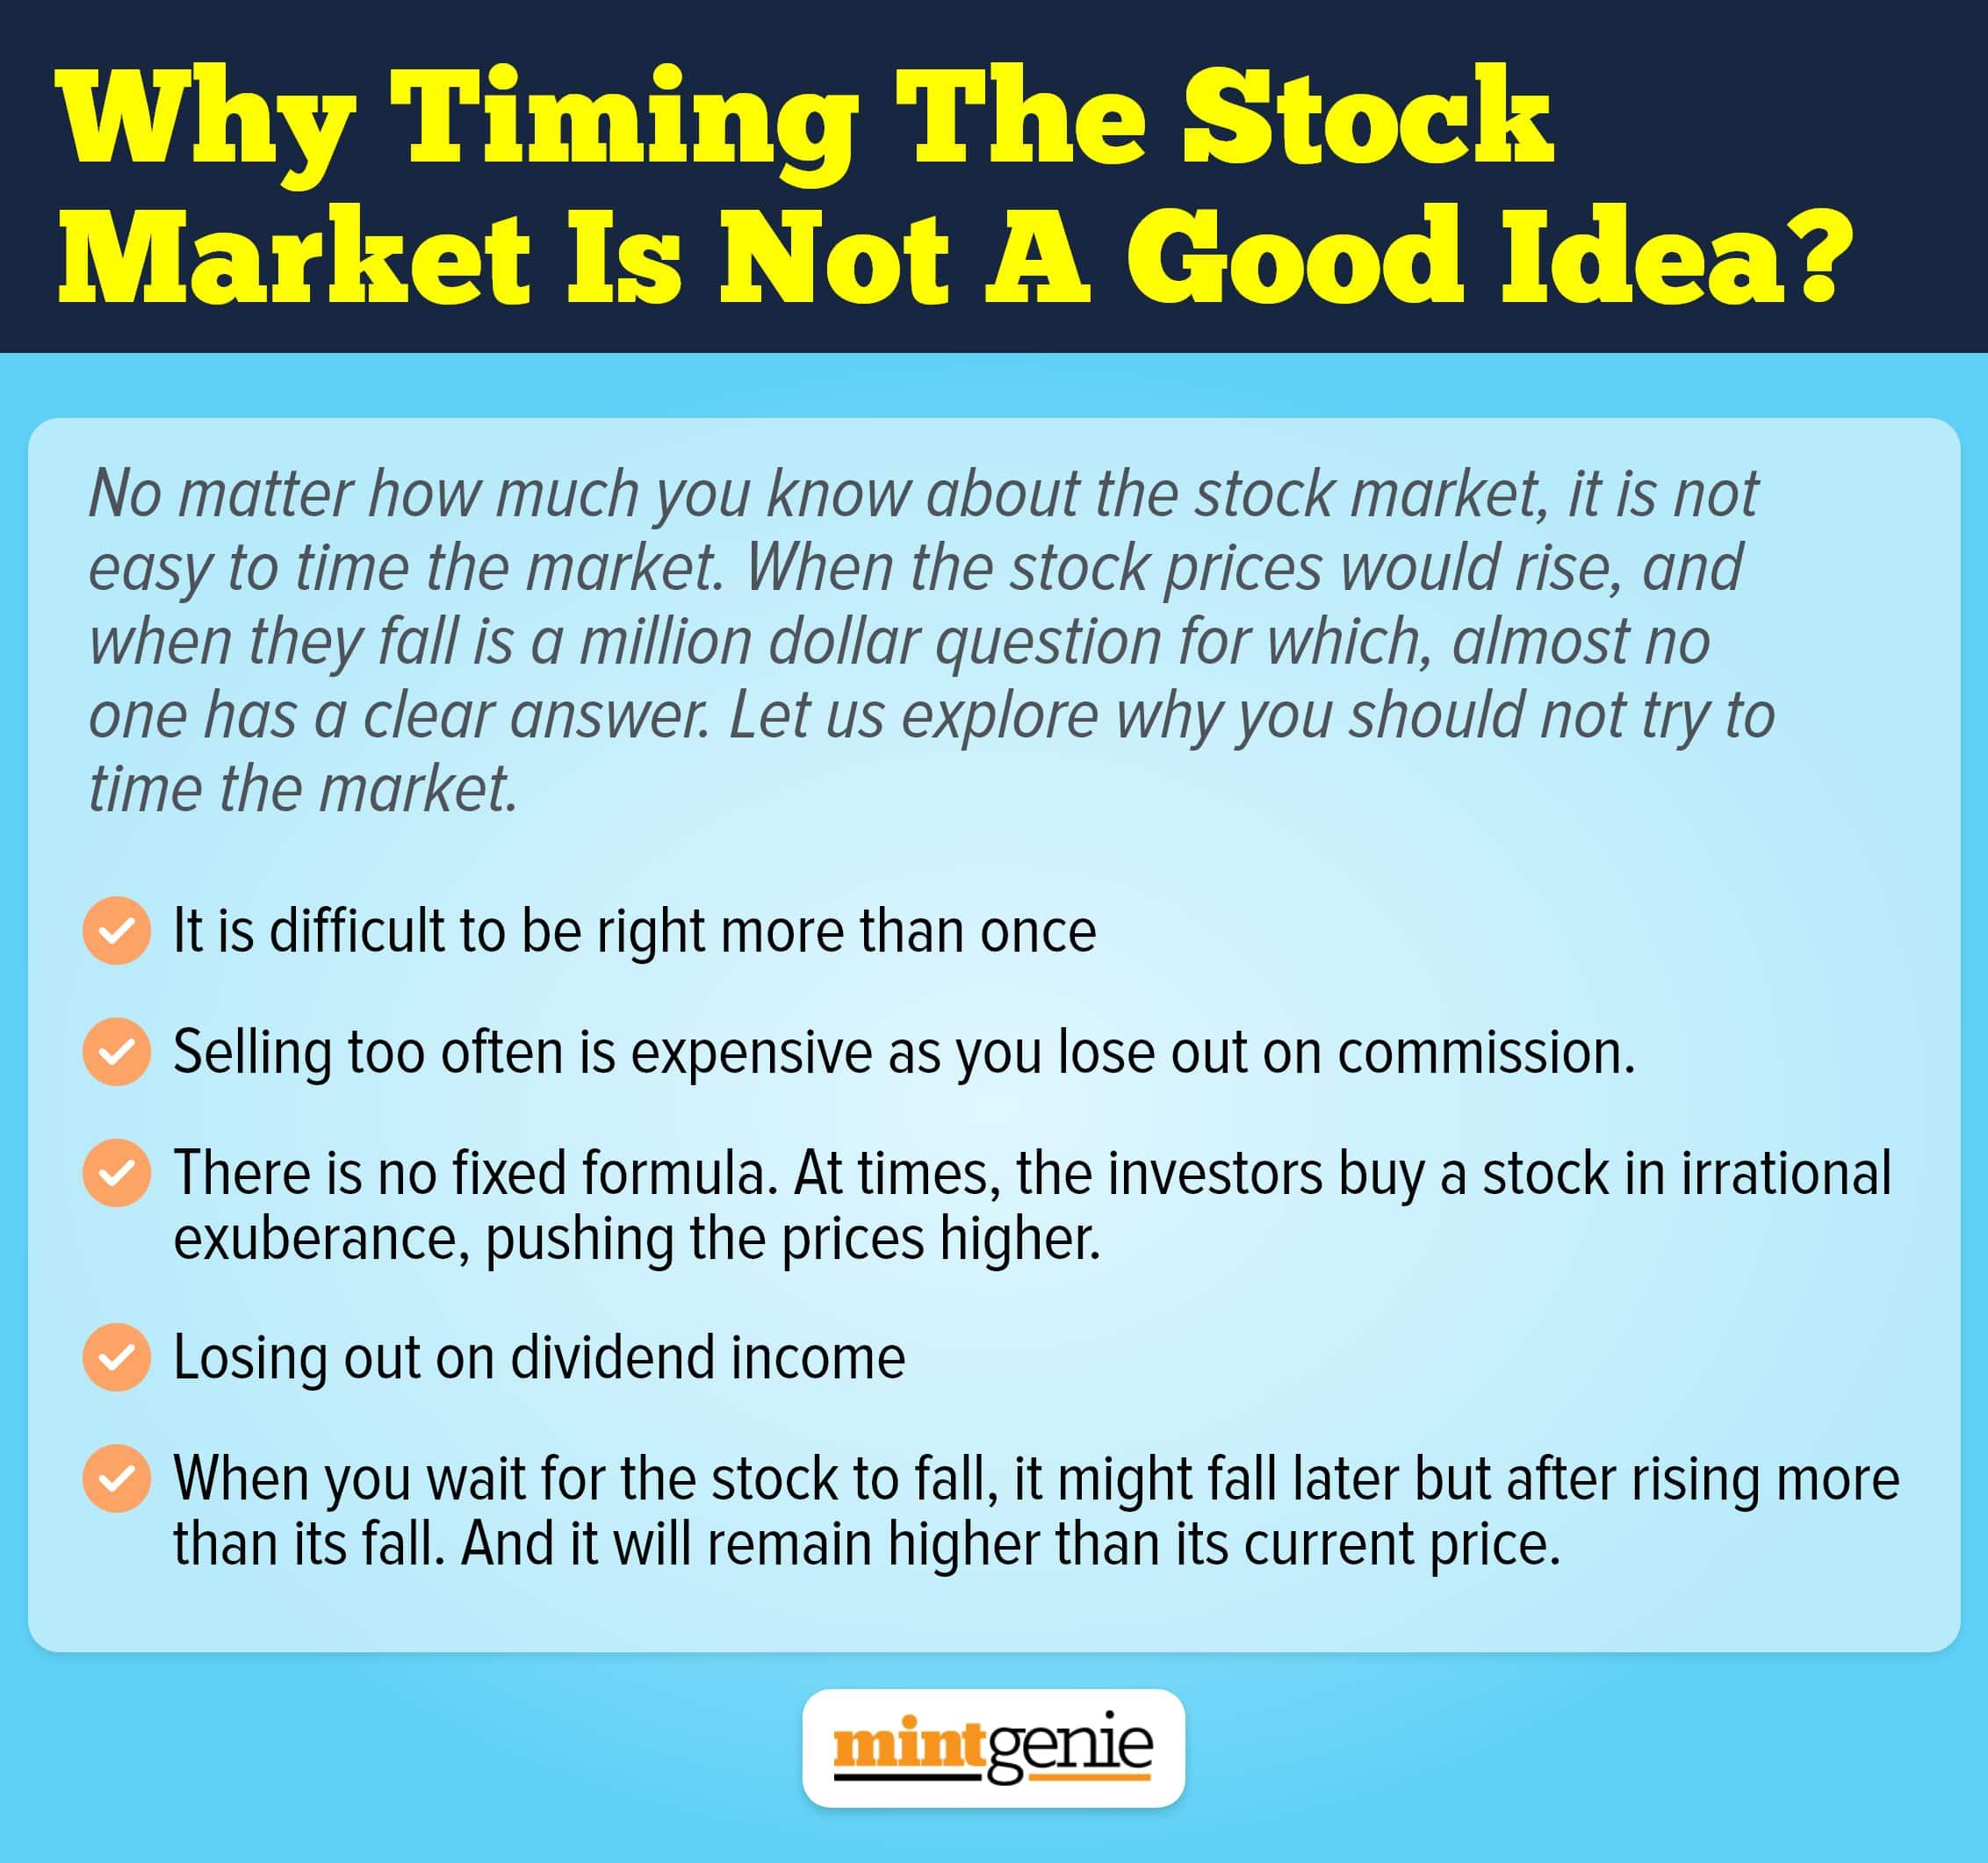 We explain why timing the stock market is not a good idea.